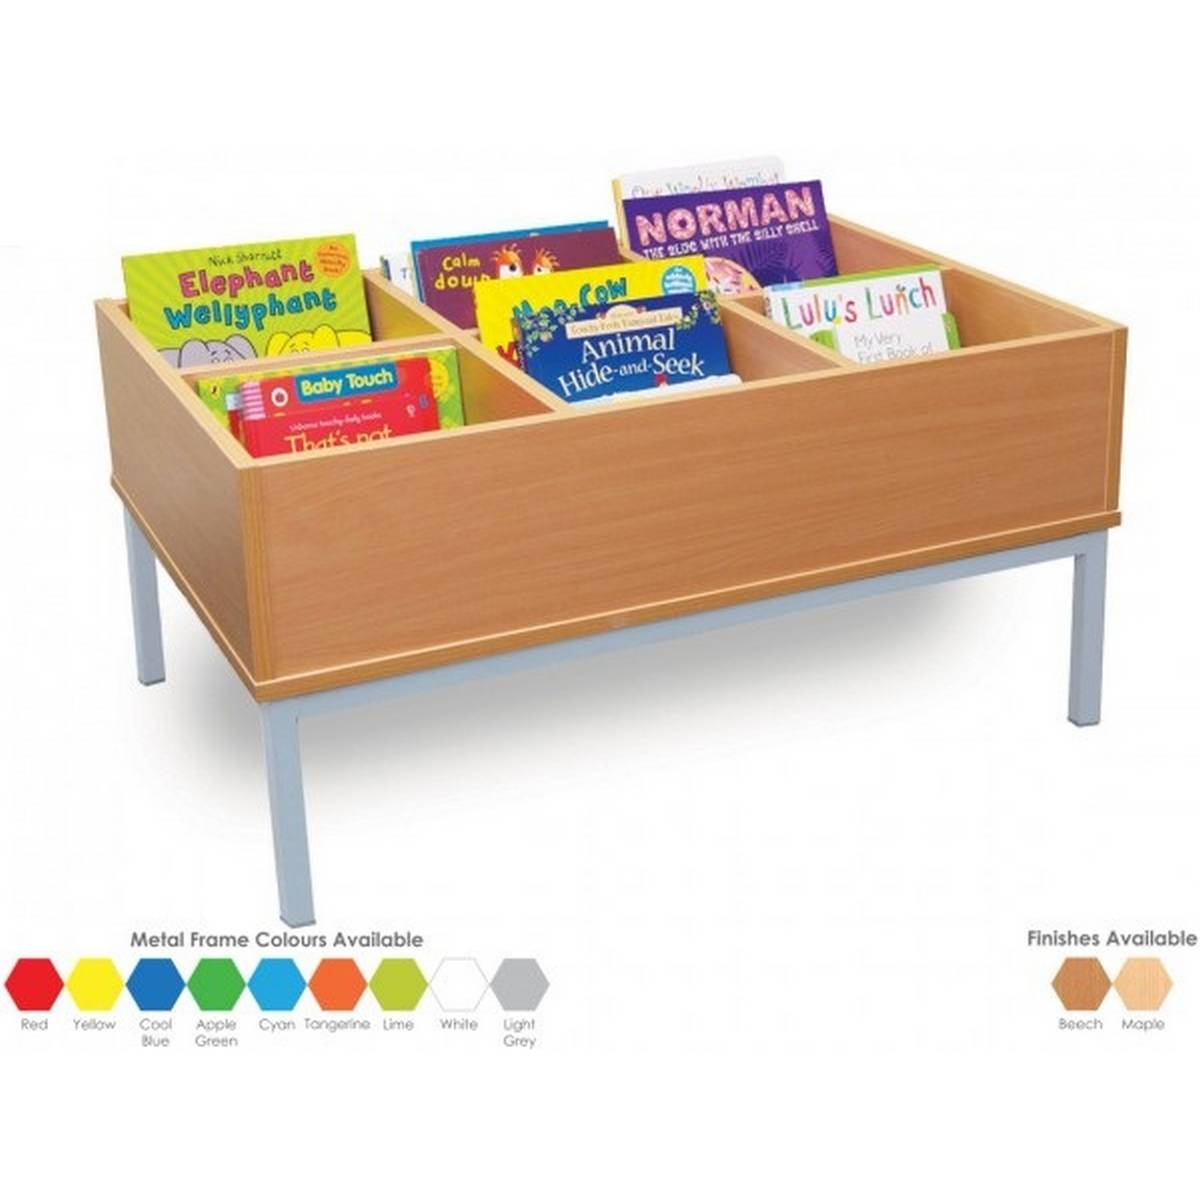 6 Bay Static Kinderbox Book Storage Unit with Legs